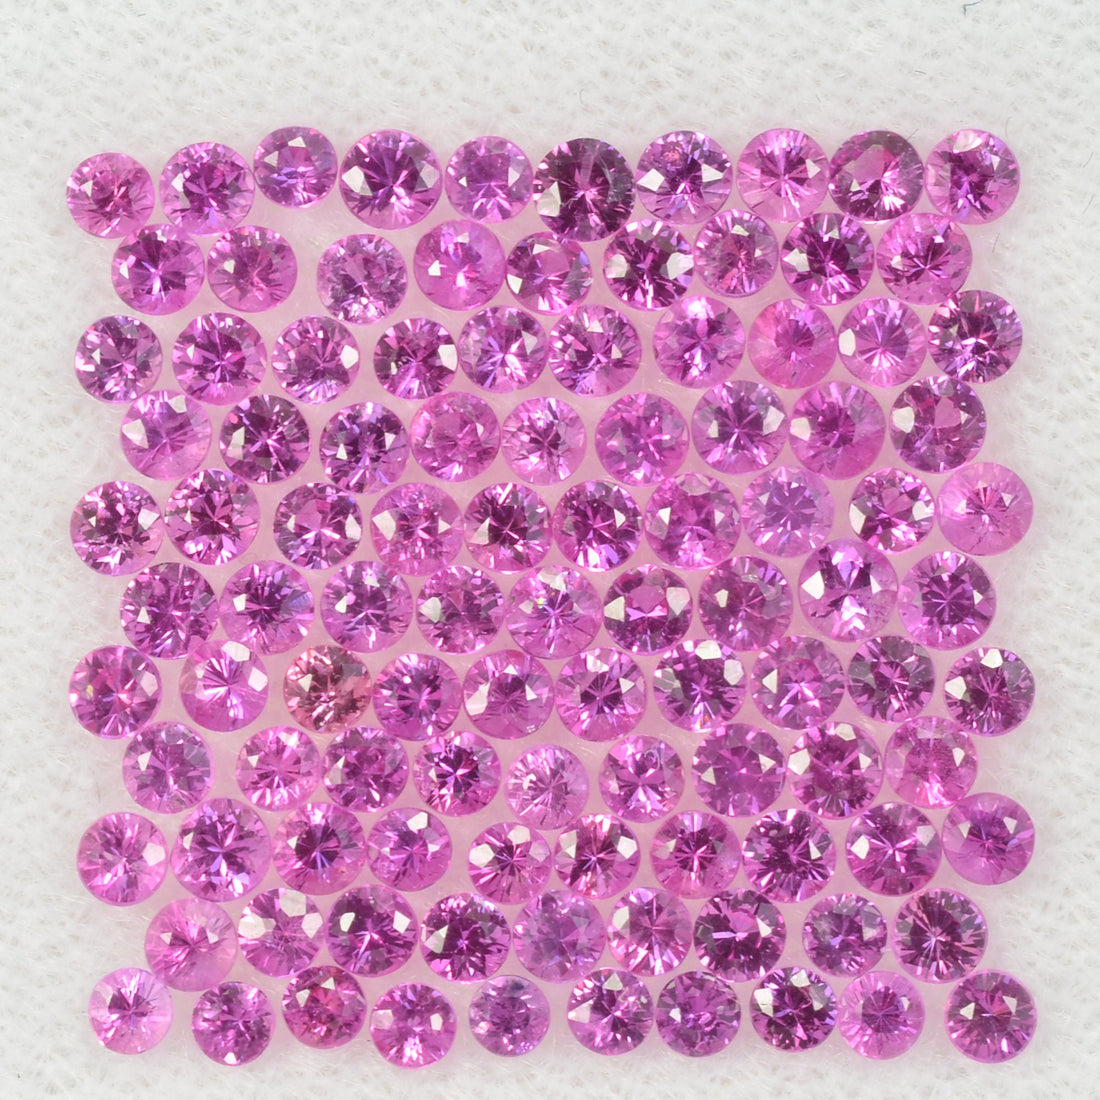 1.8-2.3 mm Natural Pink Sapphire Loose Gemstone Round Diamond Cut Cleanish Quality A Color